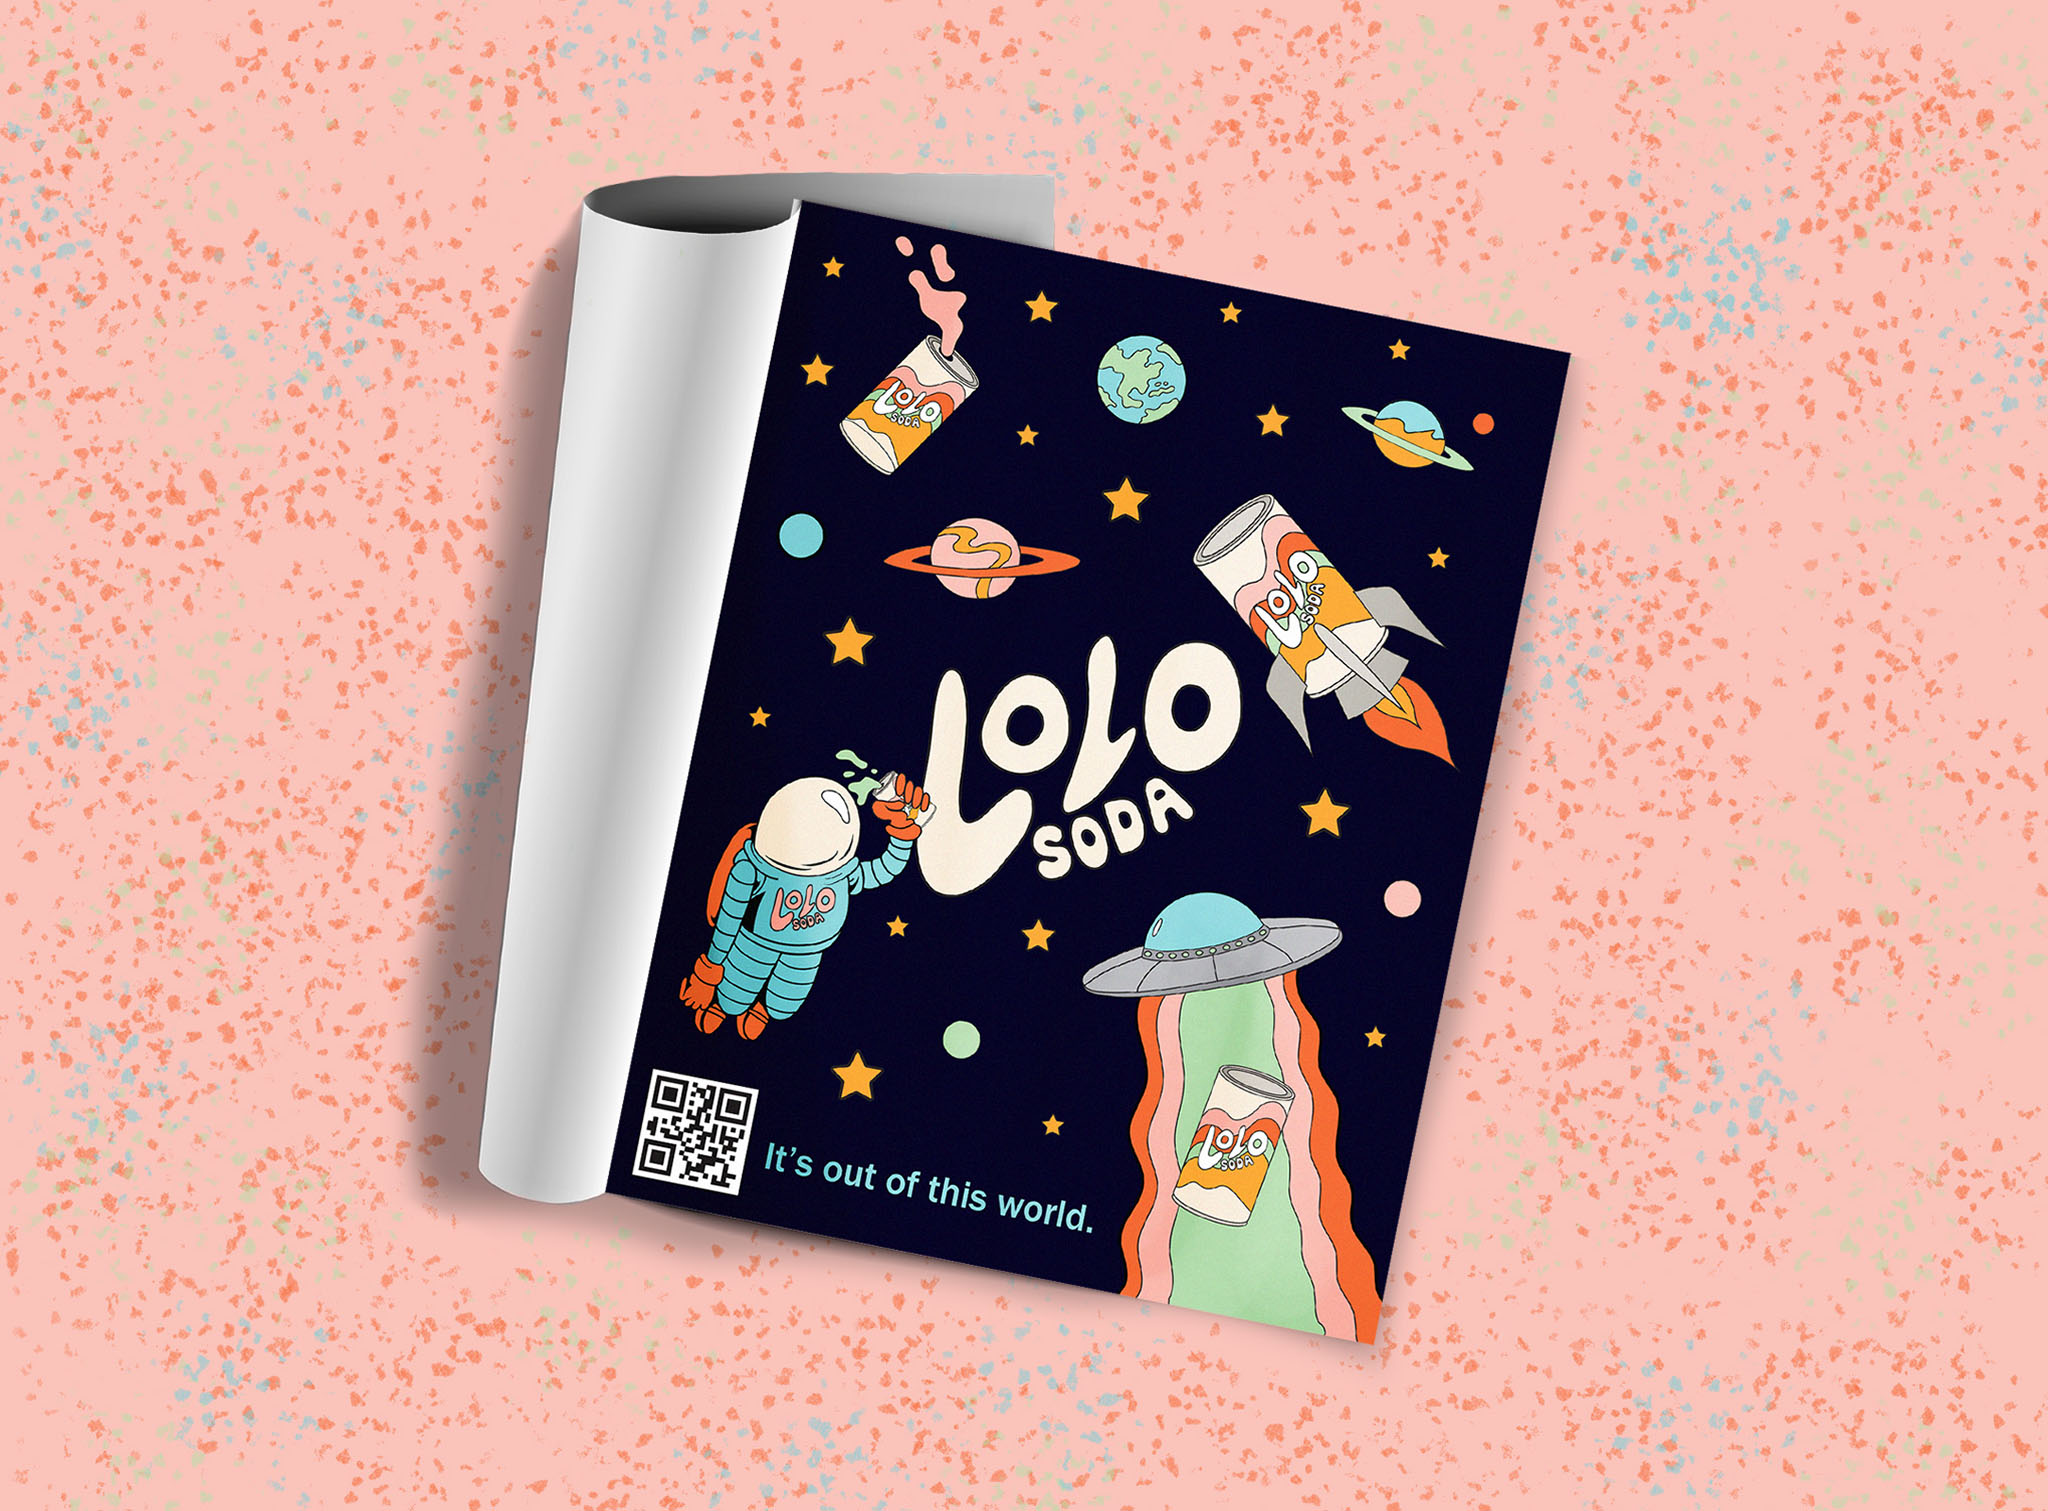 Mockup of space-illustration based magazine advertisement for Lolo soda on speckled pink background.